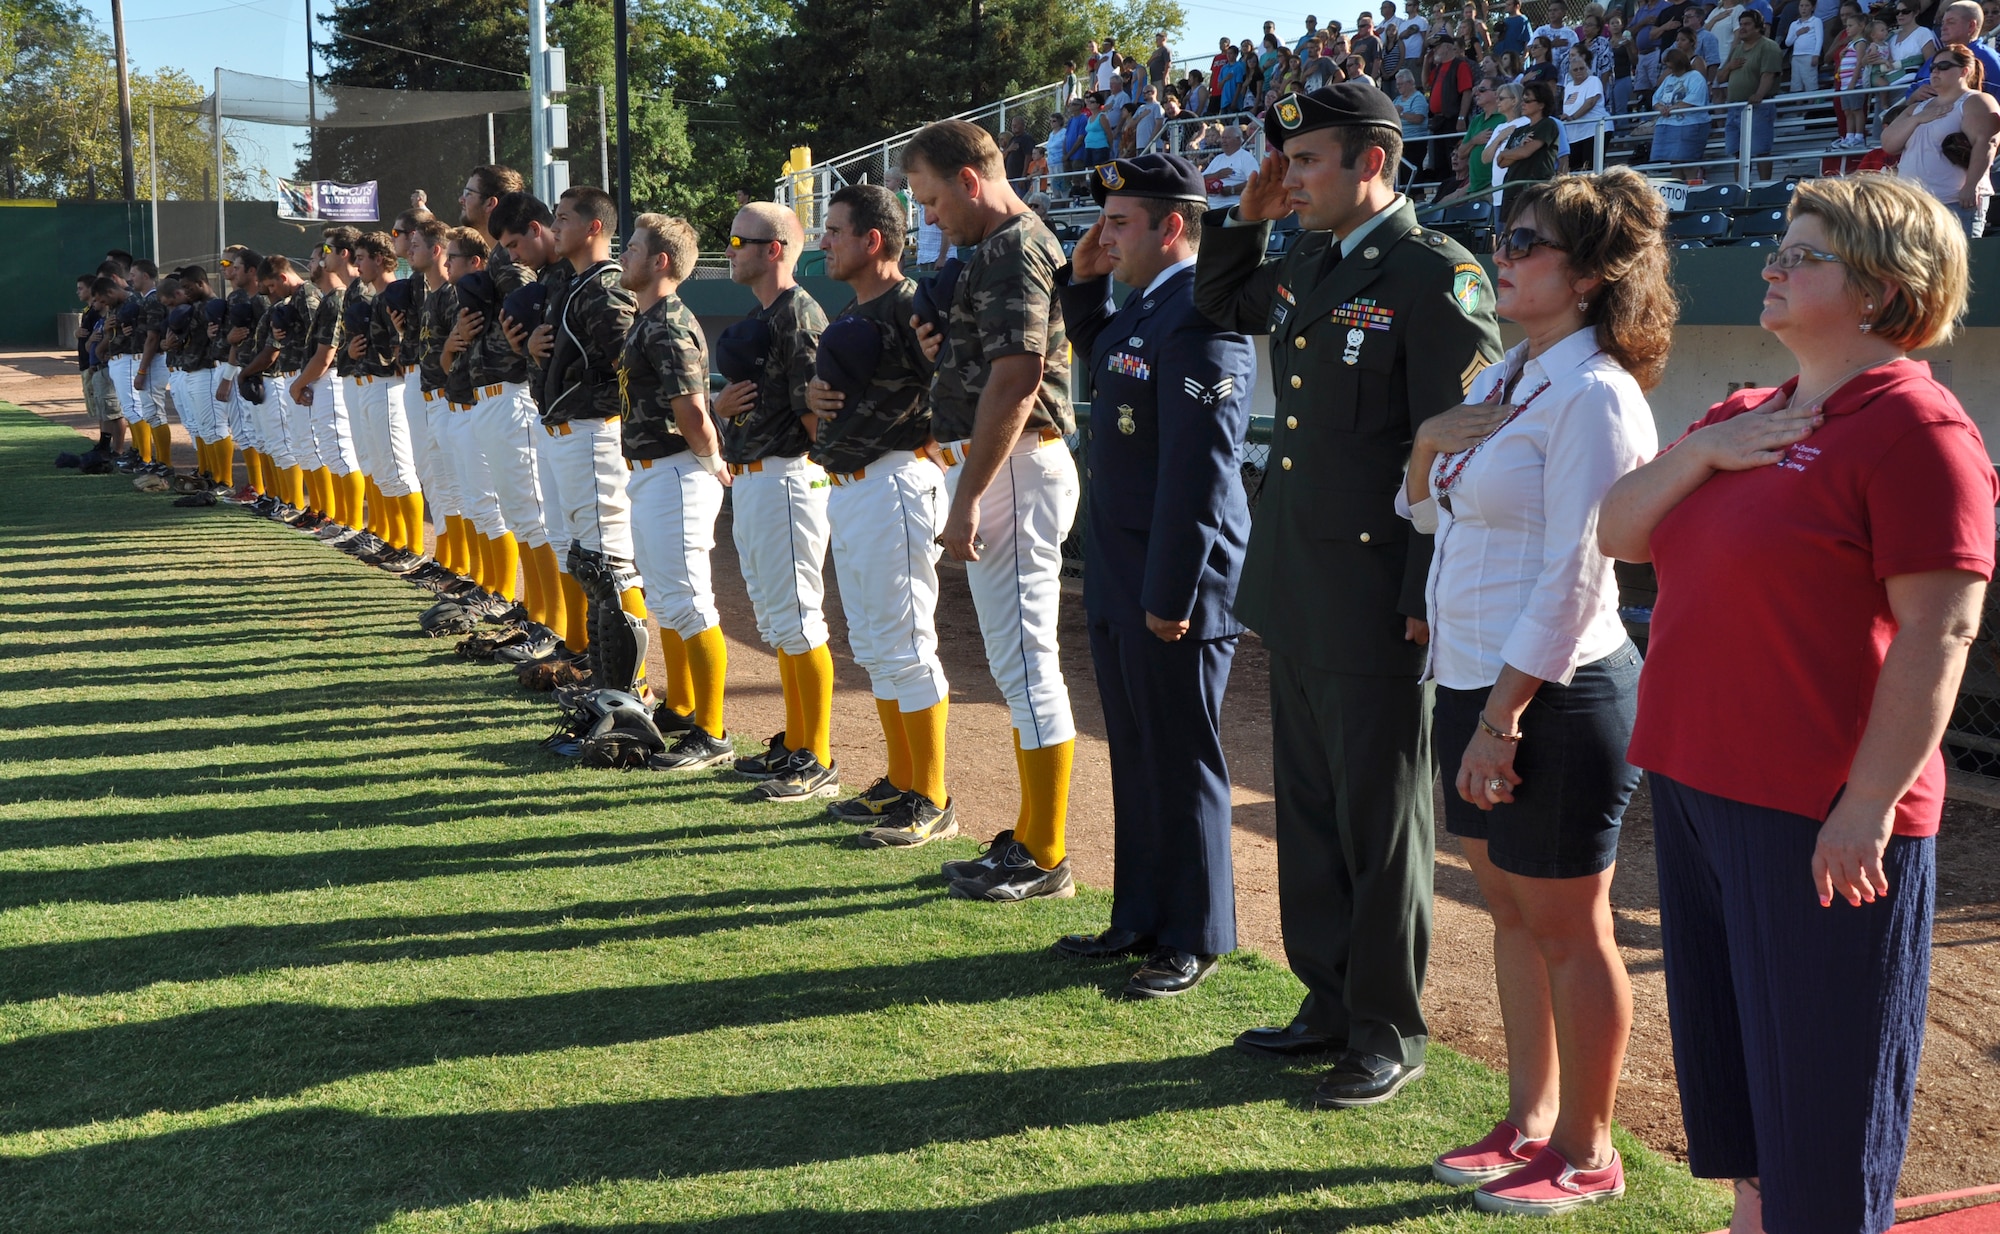 Blue Star Moms, servicemen and Gold Sox Baseball players pay their respects during the national anthem at a military appreciation game at Appeal-Democrat Park, Marysville, Calif., July 29, 2012. BSM is a non-profit organization for mothers and fathers of children serving or have served in the military. (U.S. Air Force photo by Staff Sgt. Robert M. Trujillo)